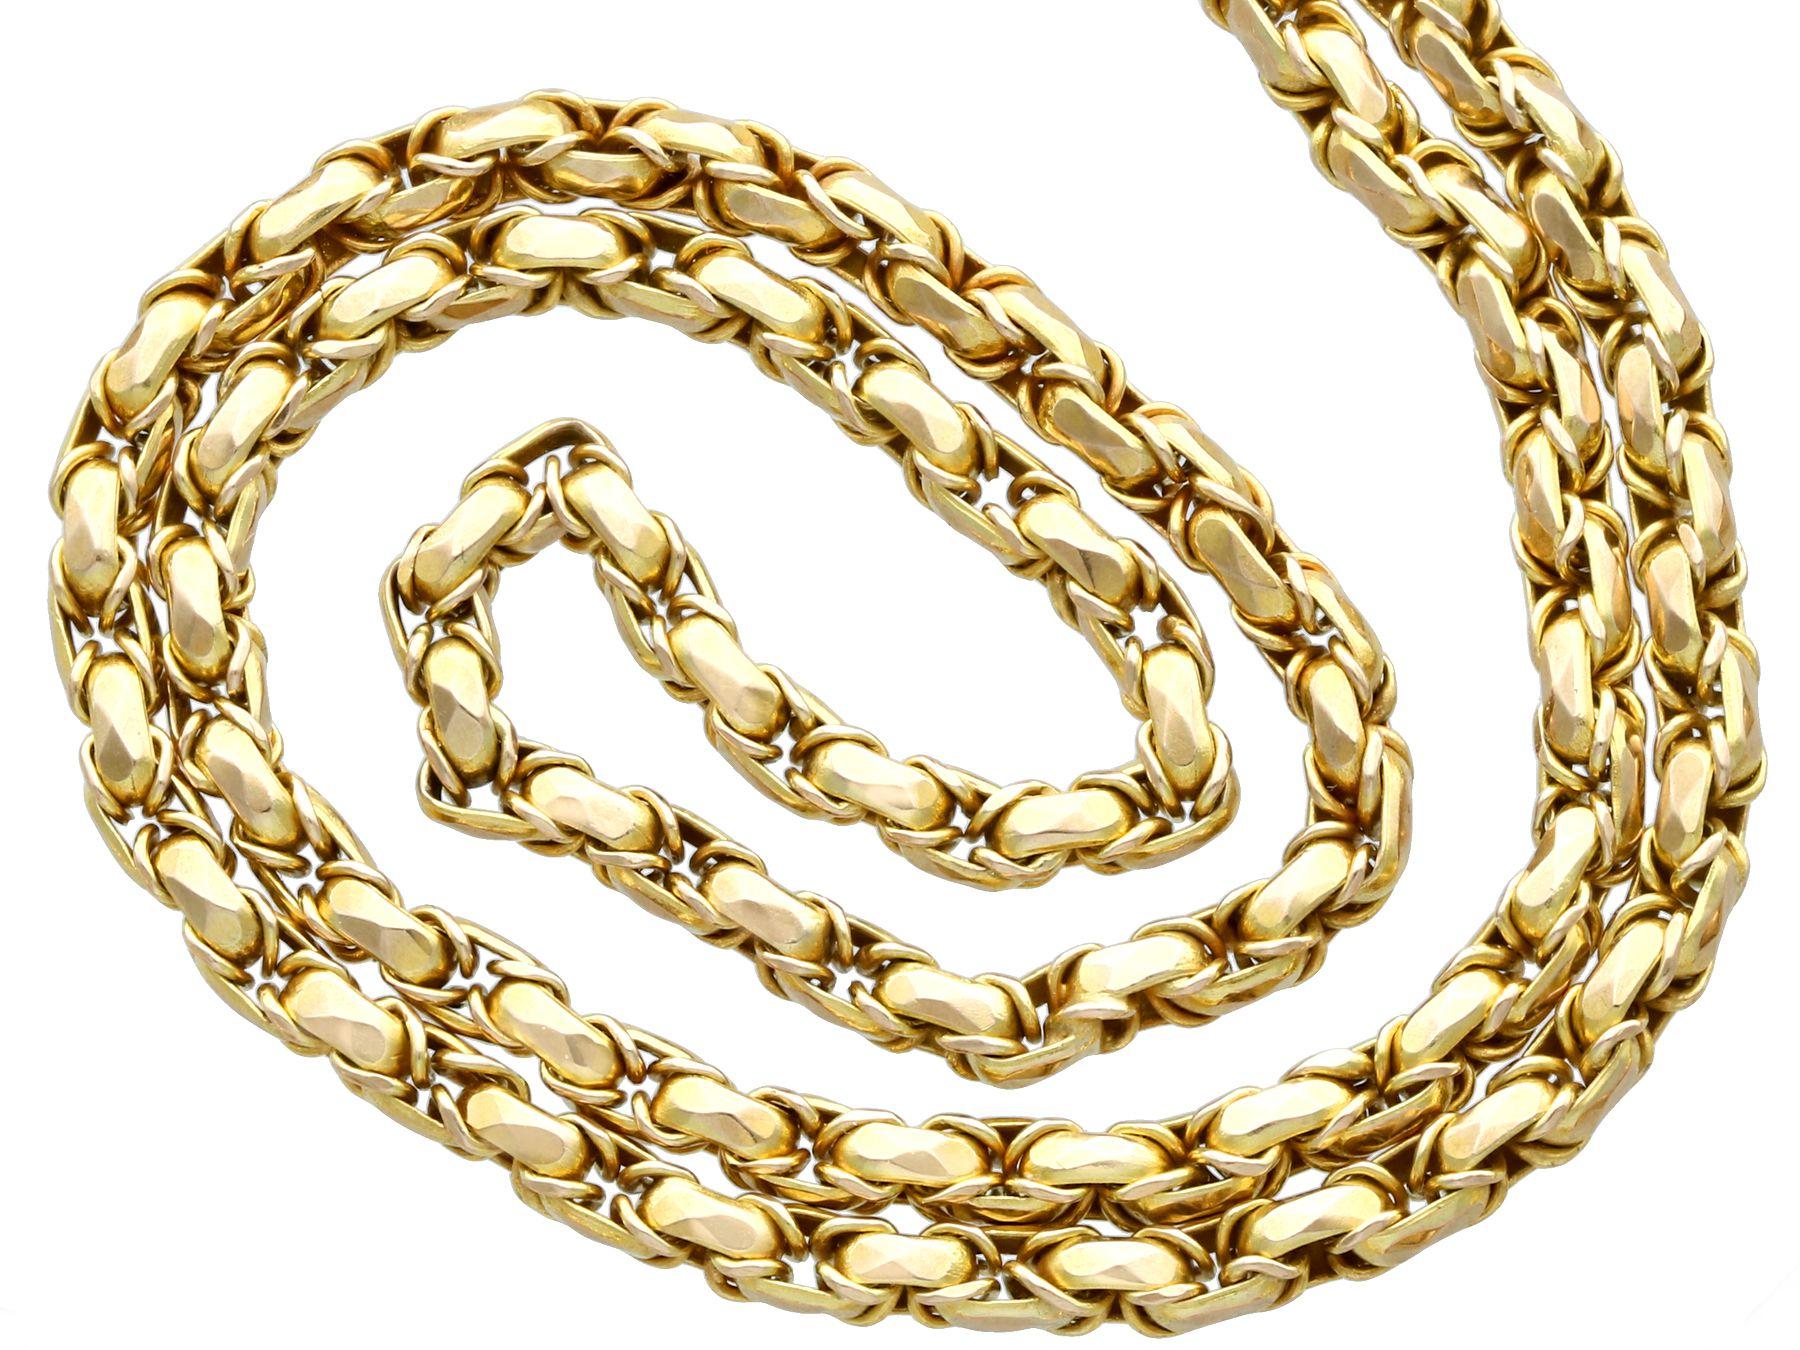 A fine and impressive antique Victorian 9 karat yellow gold longuard / watch chain; part of our diverse antique jewelry and estate jewelry collections

This fine and impressive watch chain has been crafted in 9k yellow gold.

The faceted oval links